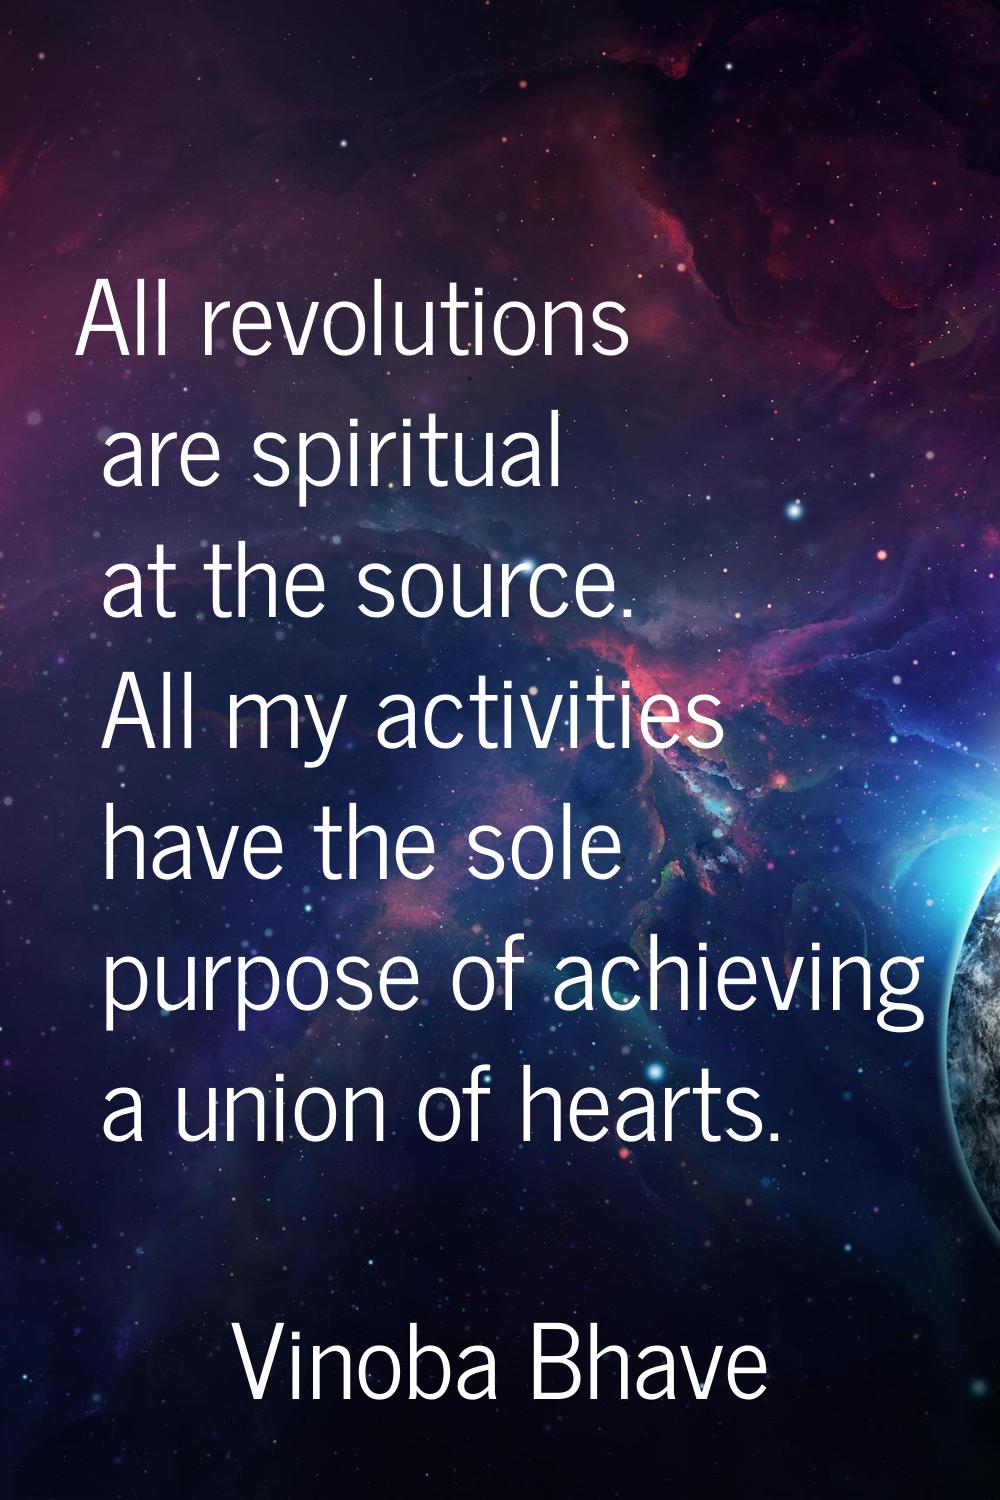 All revolutions are spiritual at the source. All my activities have the sole purpose of achieving a